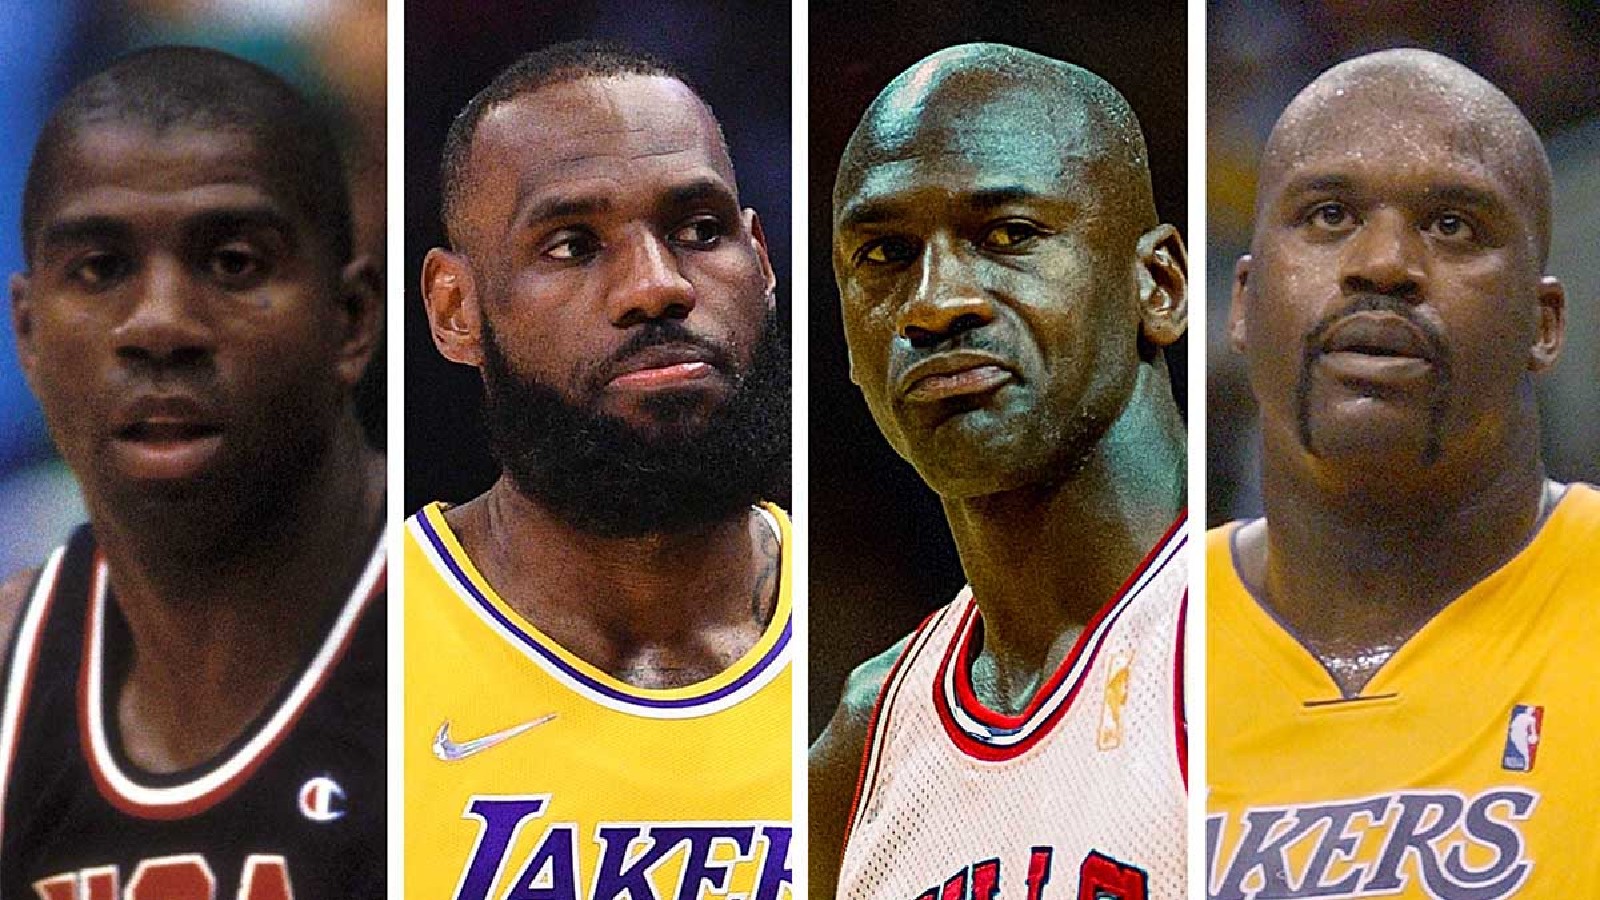 Top 10 Richest NBA Players of All Time Which Top 10